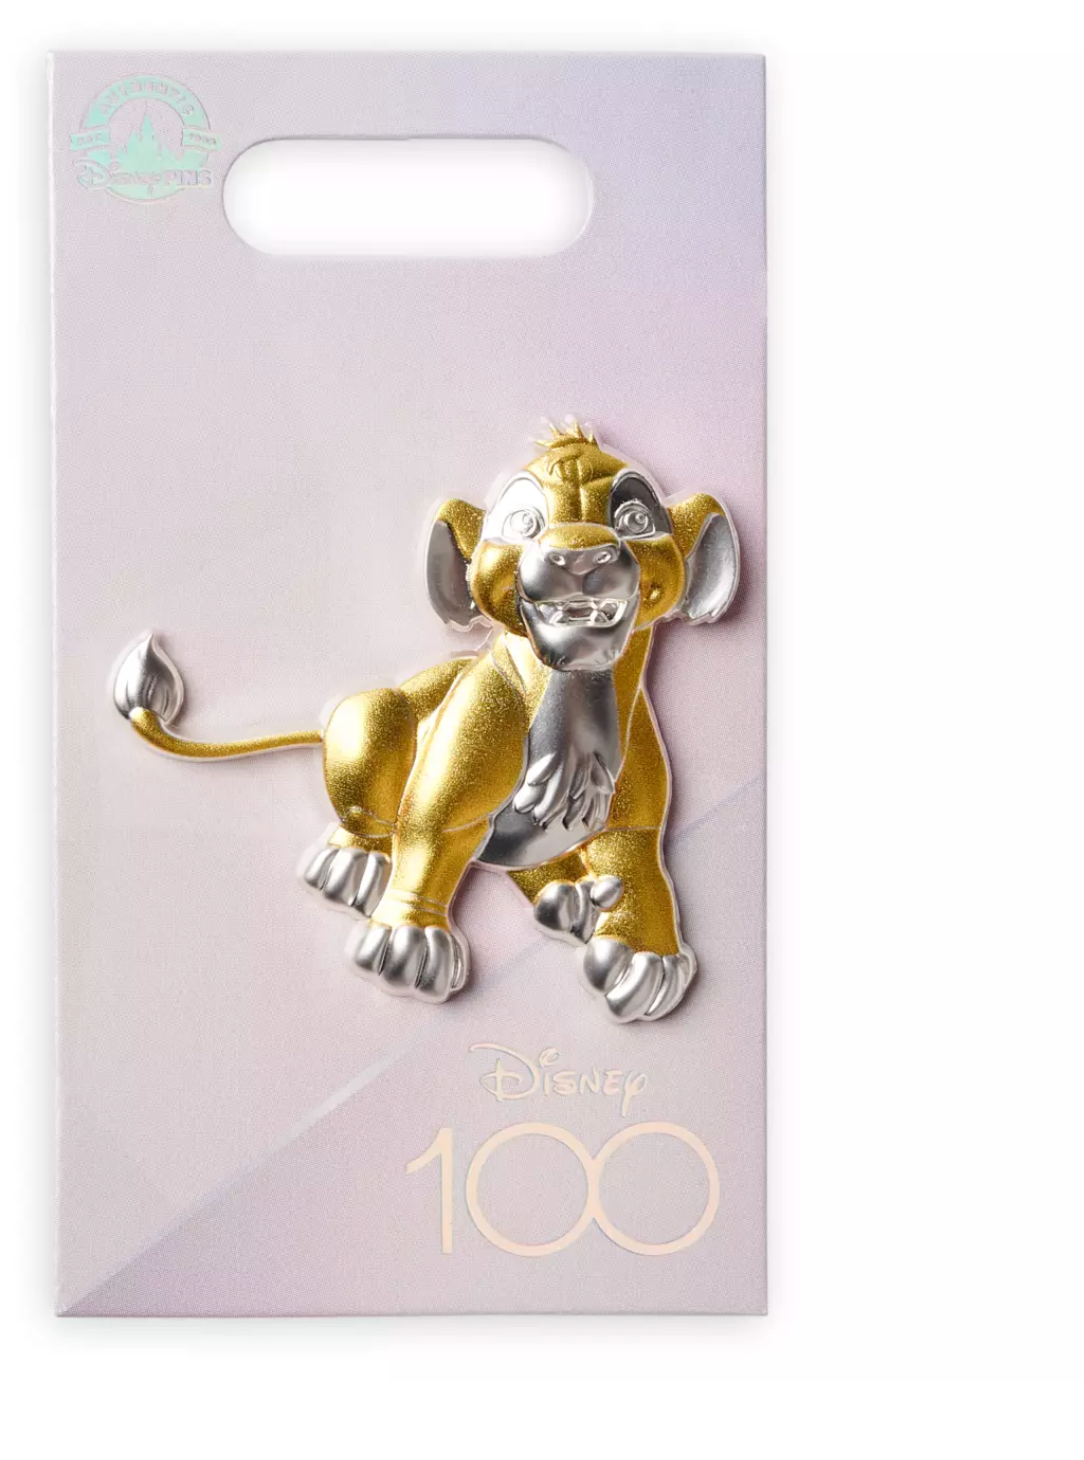 Disney 100 Years of Wonder Celebration The Lion King Simba 3D Pin New with Card